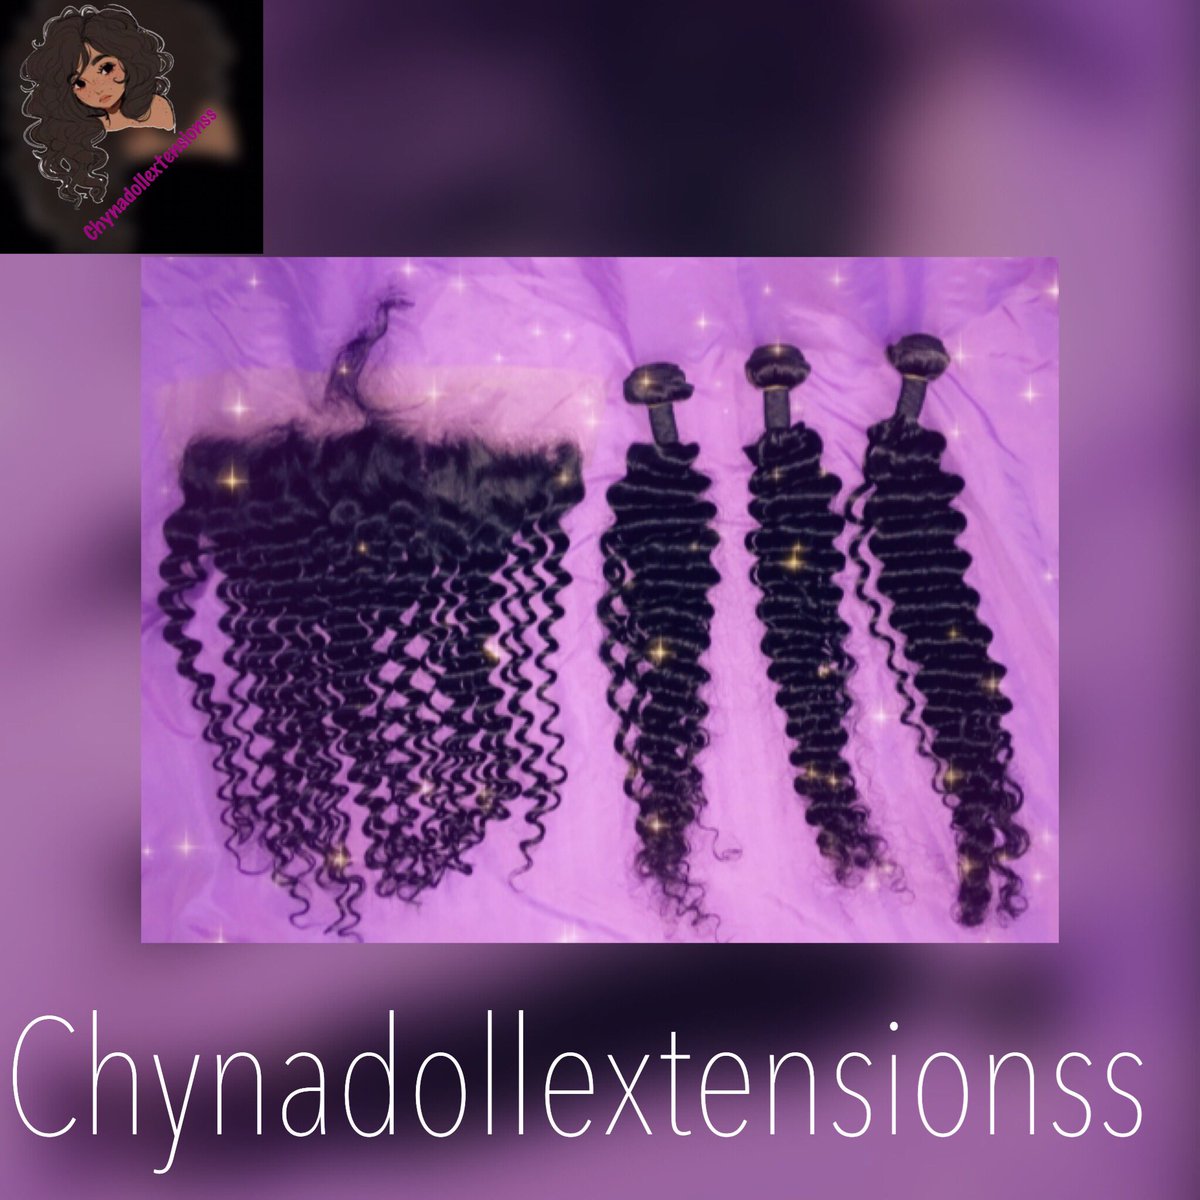 It’s Chynadoll Tuesday 20% off your entire order‼️ Shop chynadollextensionss  NOW ‼️The Doll Way is the only way #Chynadoll #preorder #shipping #wigsbundles #wigs #houstonhairstylist #houstonbundles #houstonbundledeals #wigdeals #bodywavebundles #straightbundles #deepwavebundles